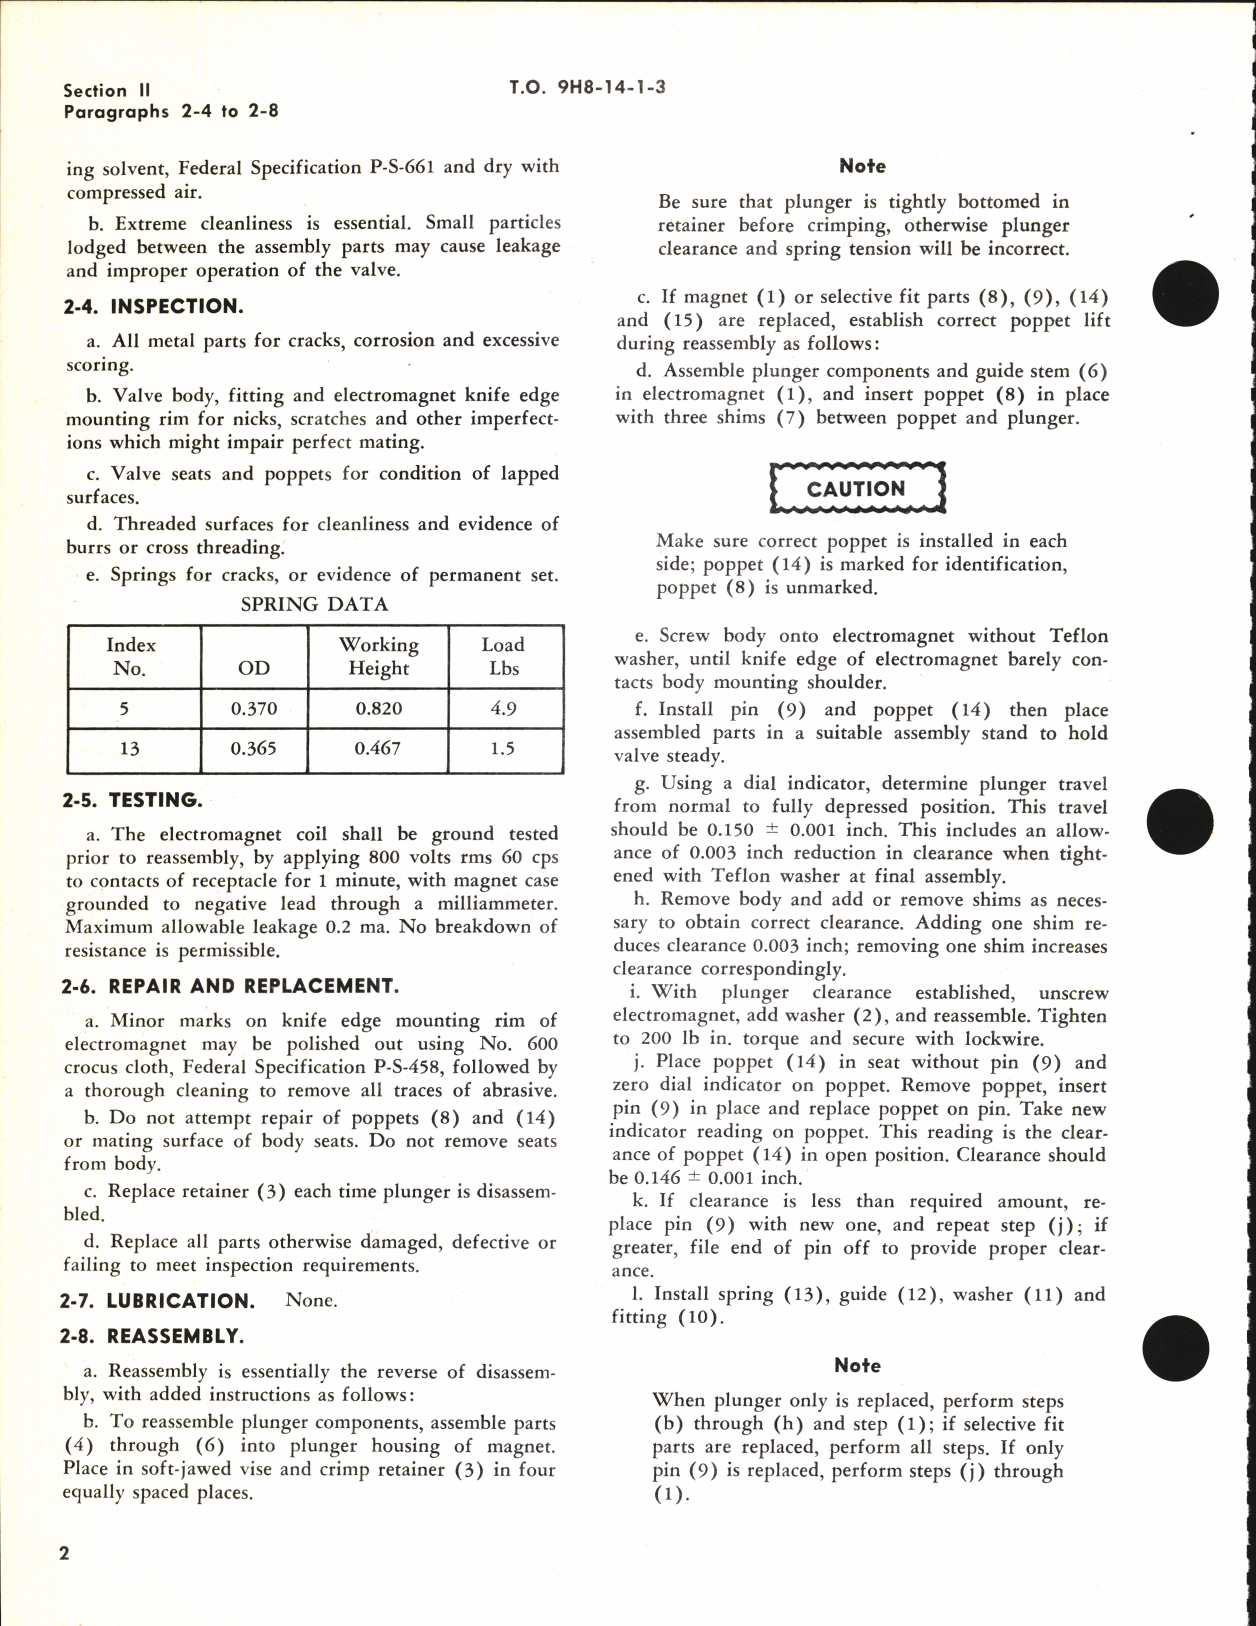 Sample page 6 from AirCorps Library document: Handbook of Overhaul Instructions for Electro Magnetic 3-way, Two Position Selector Valve